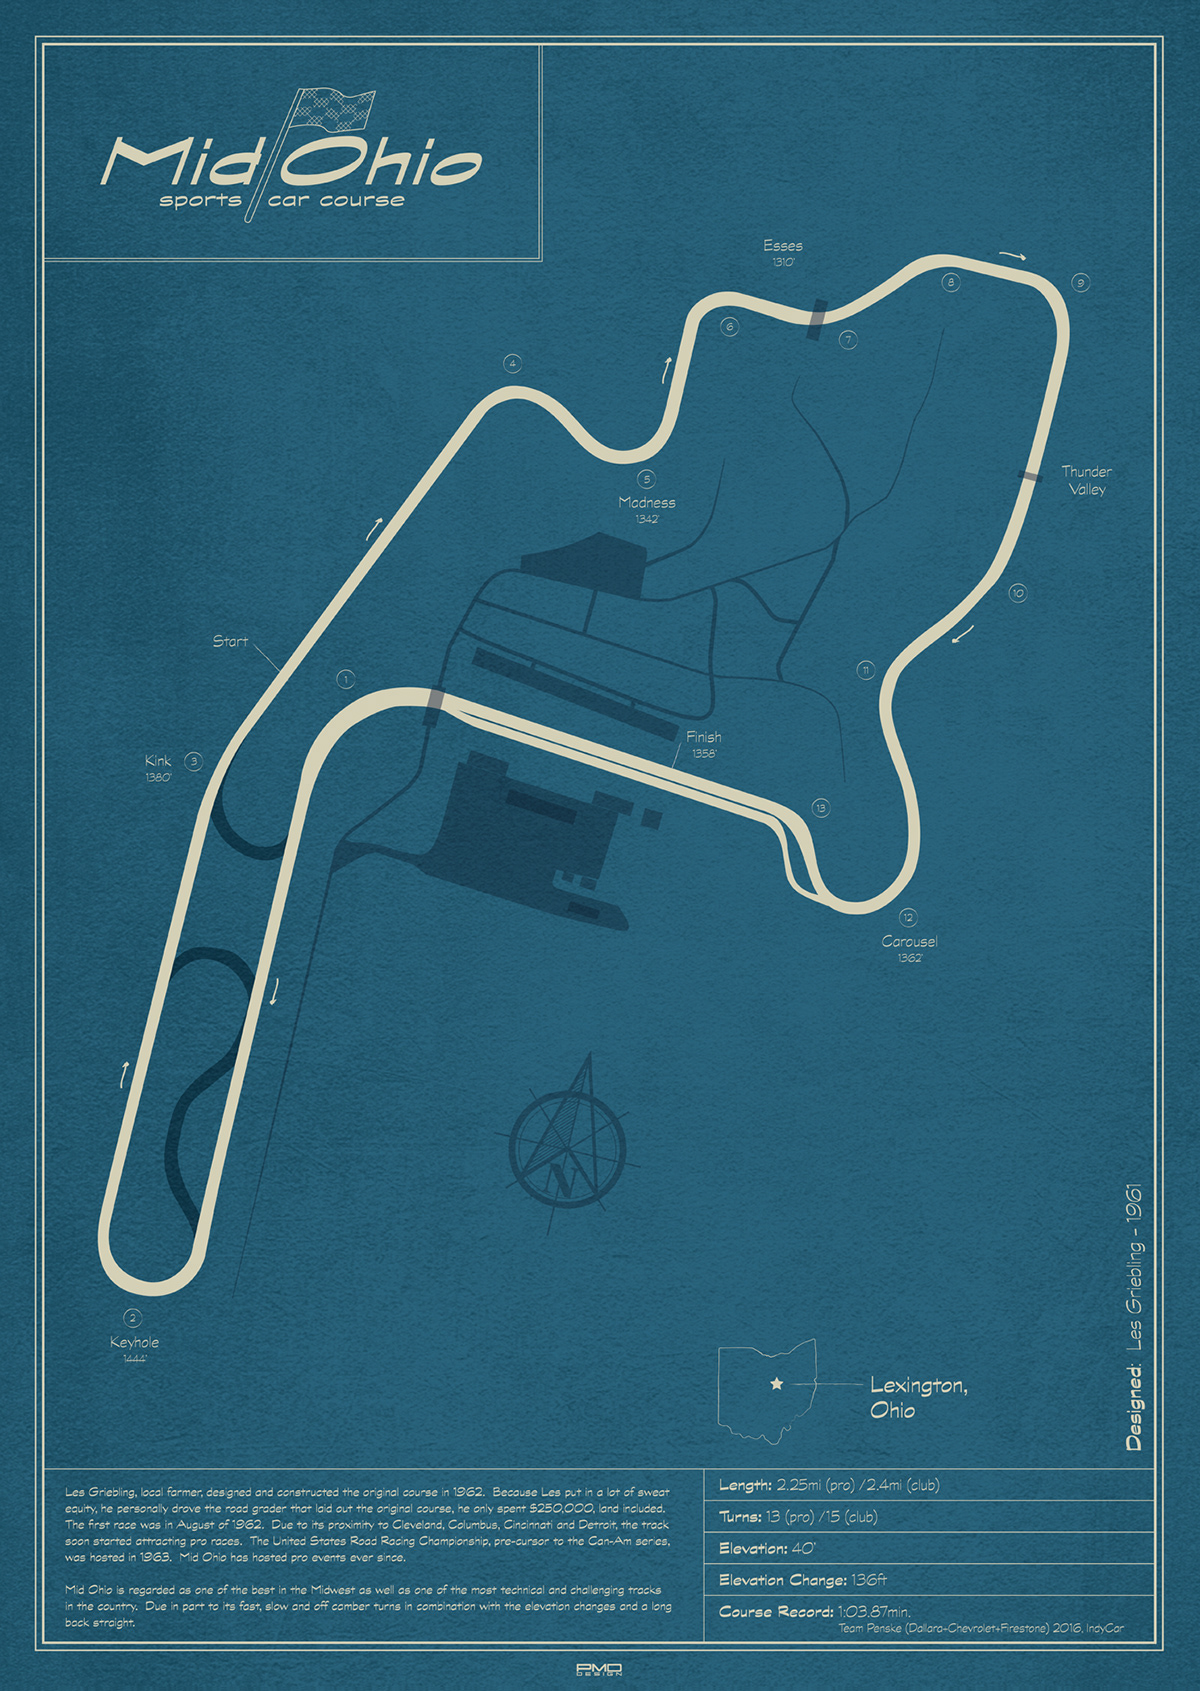 Blueprint ILLUSTRATION  map poster Race Circuit race track race track map Racing technical drawing vector